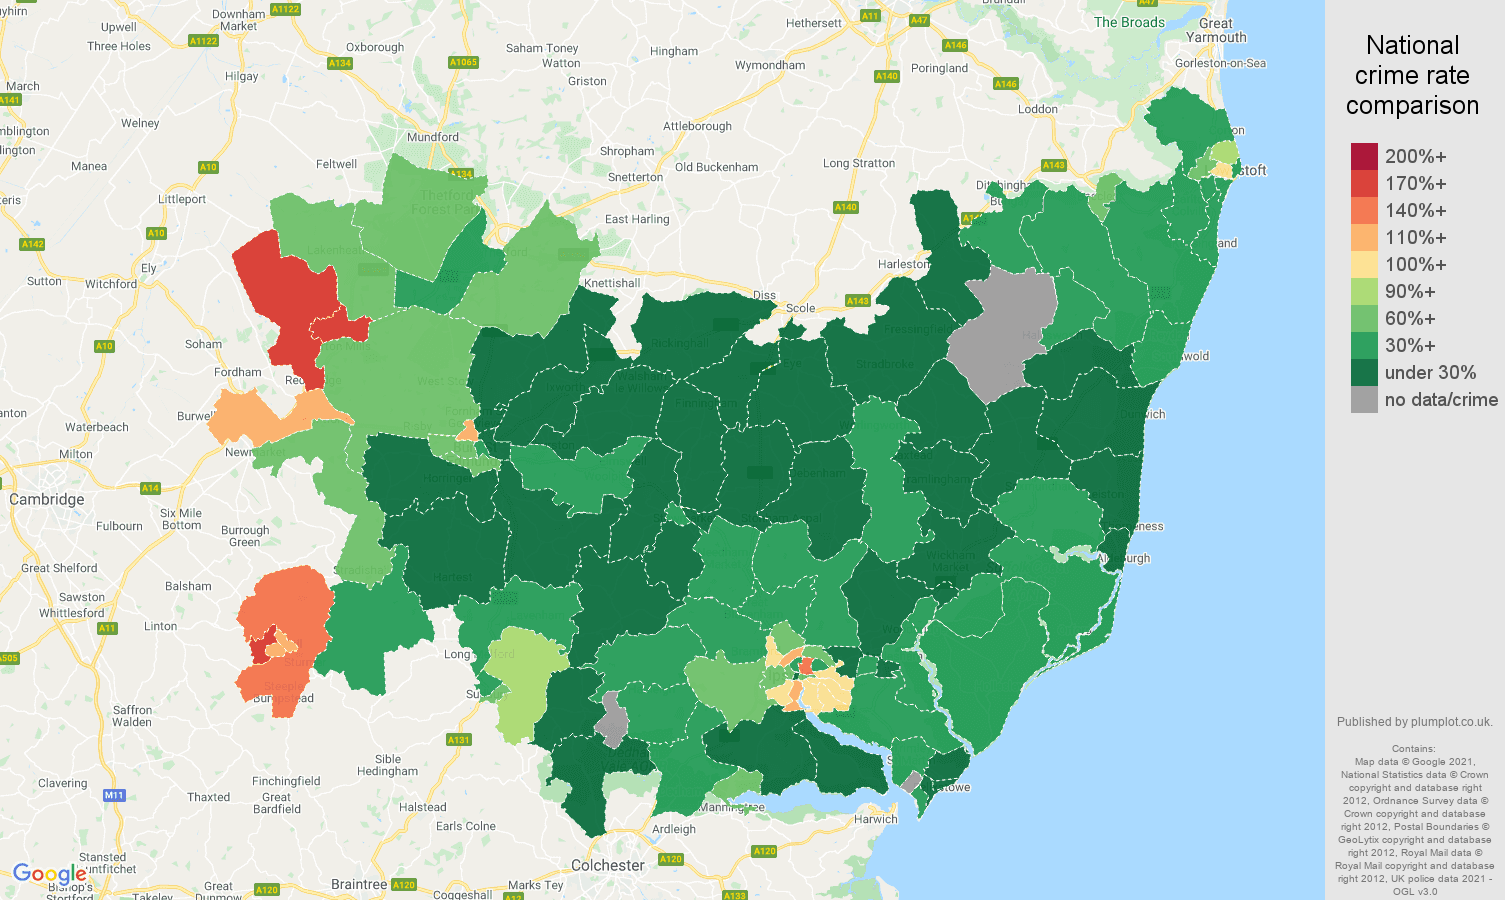 Suffolk vehicle crime rate comparison map